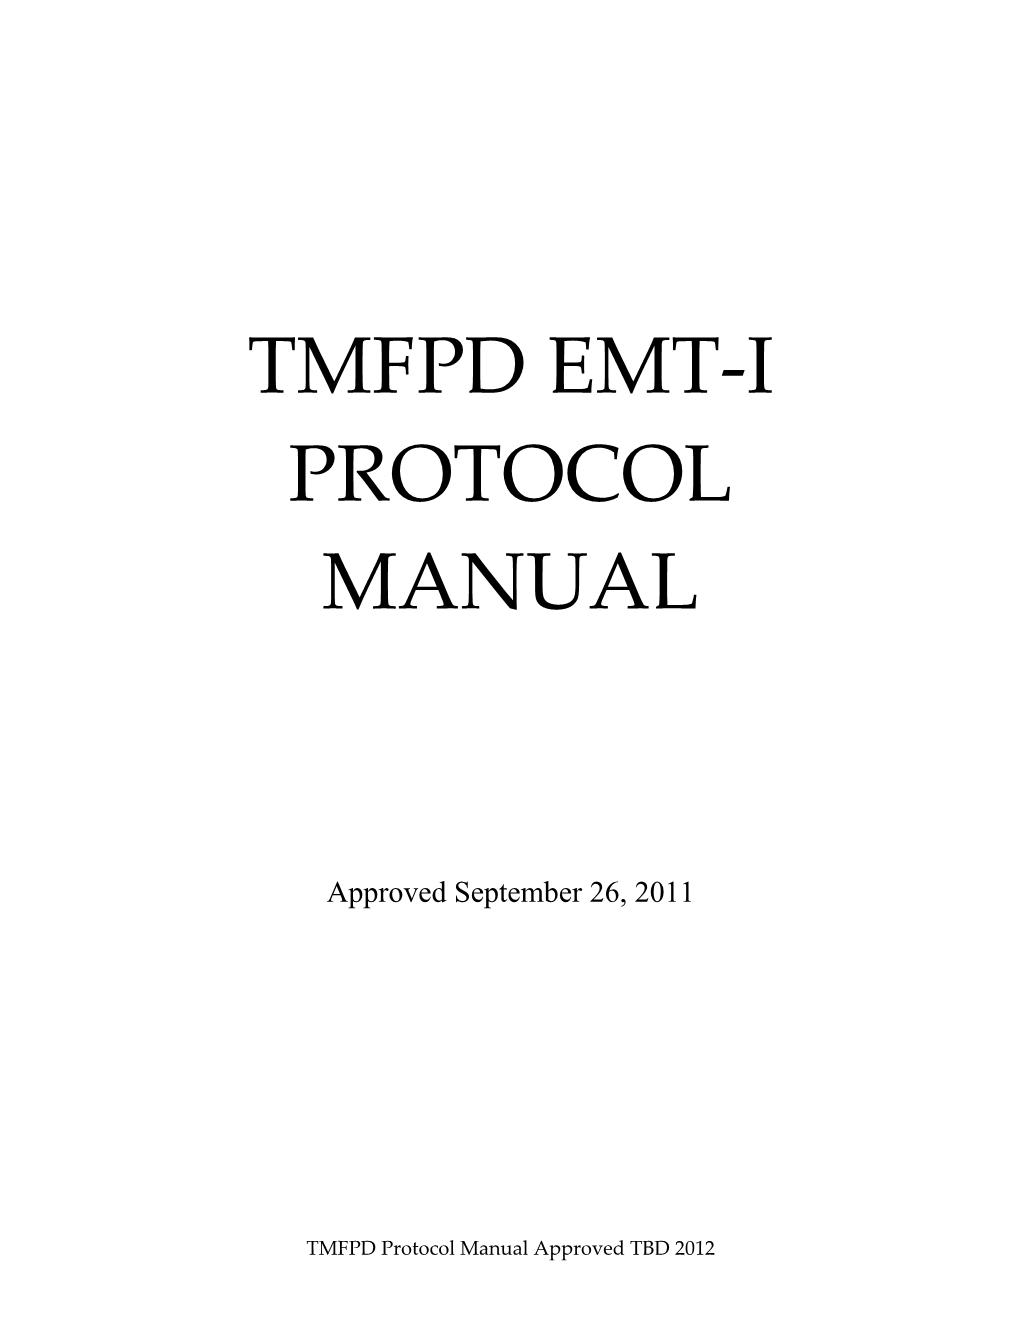 These Protocols Were Developed for the Following Reasons